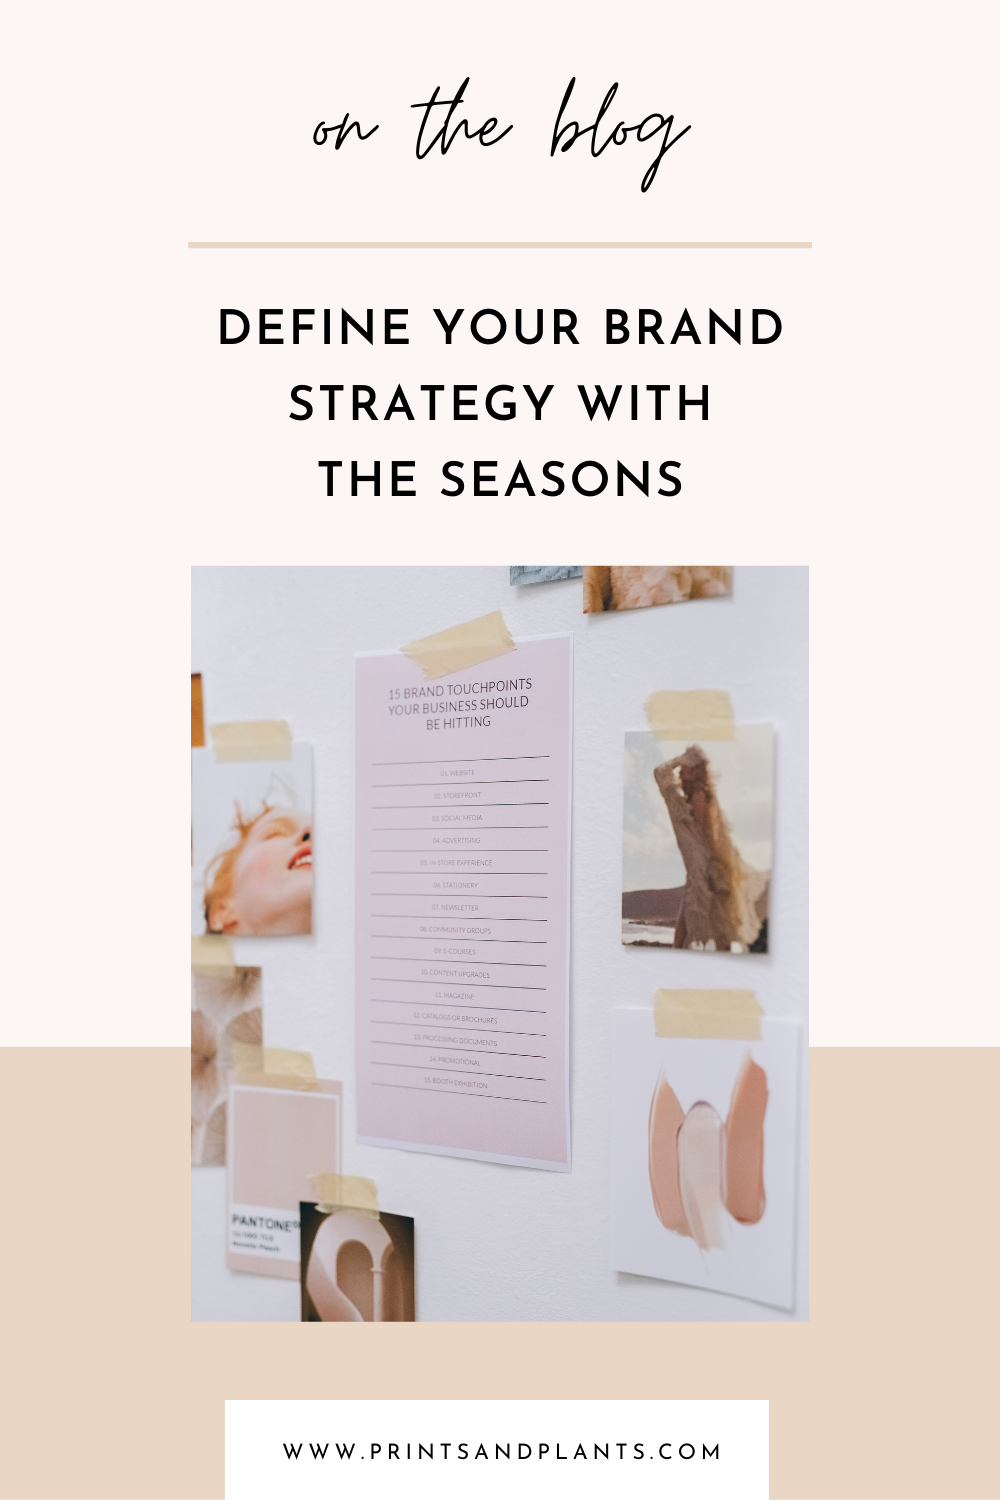 Define Your Brand Strategy with the Seasons